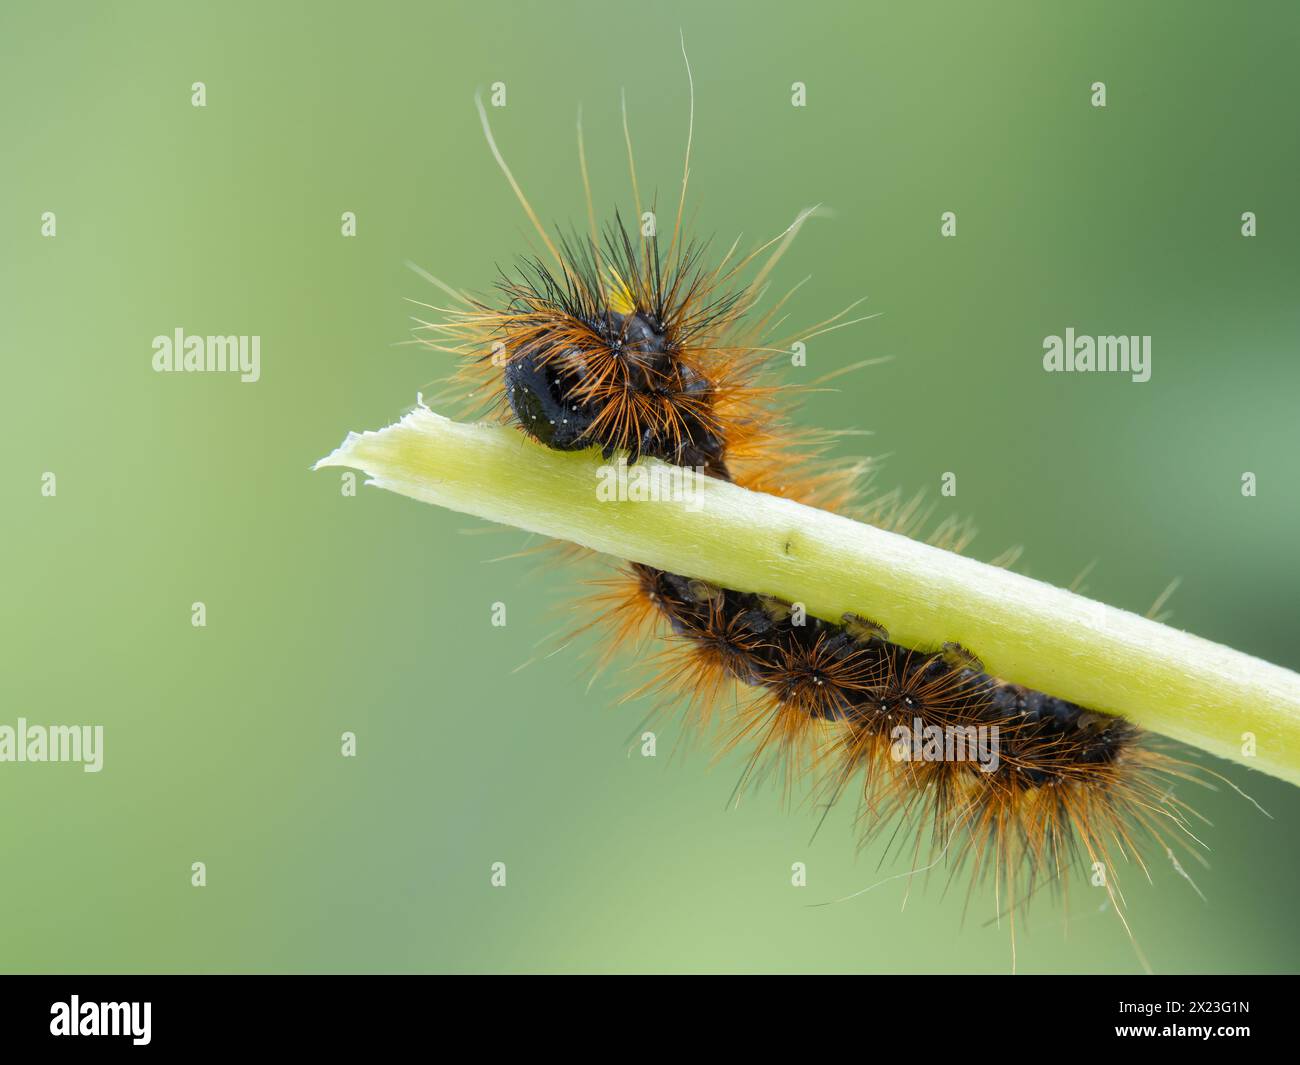 a silver-spotted tiger moth caterpillar, Lophocampa argentata, speckled with pollen grains, chewing on a plant stem, Delta, British Columbia, Canada Stock Photo